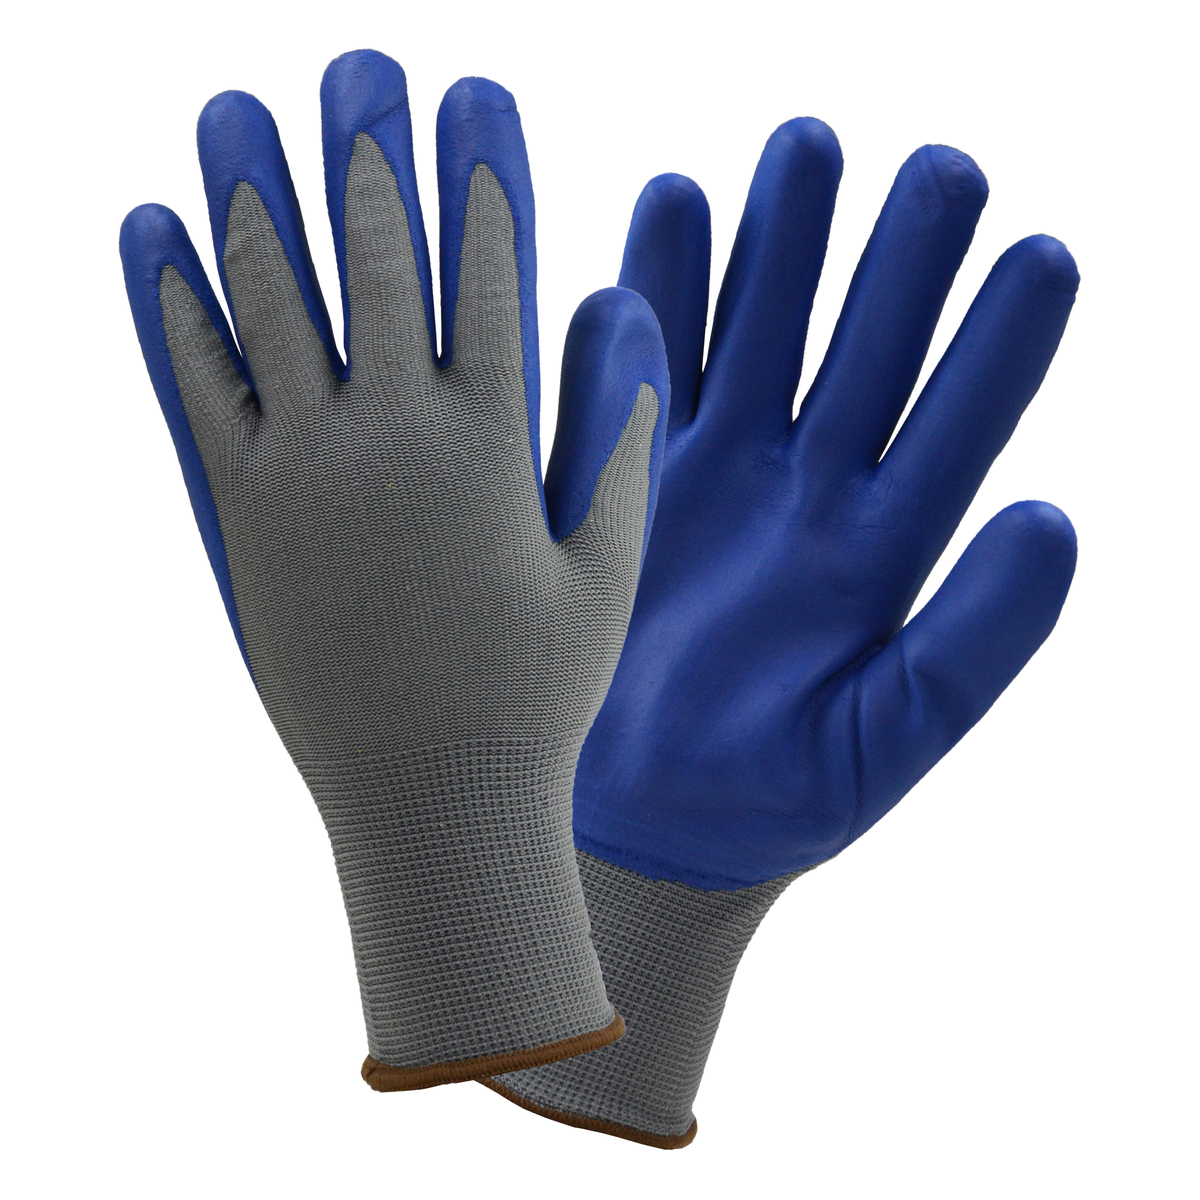 PIP® 13 Gauge Blue Nitrile Palm Finger And Knuckles Coated Work Gloves With Polyester Liner And Knit Wrist